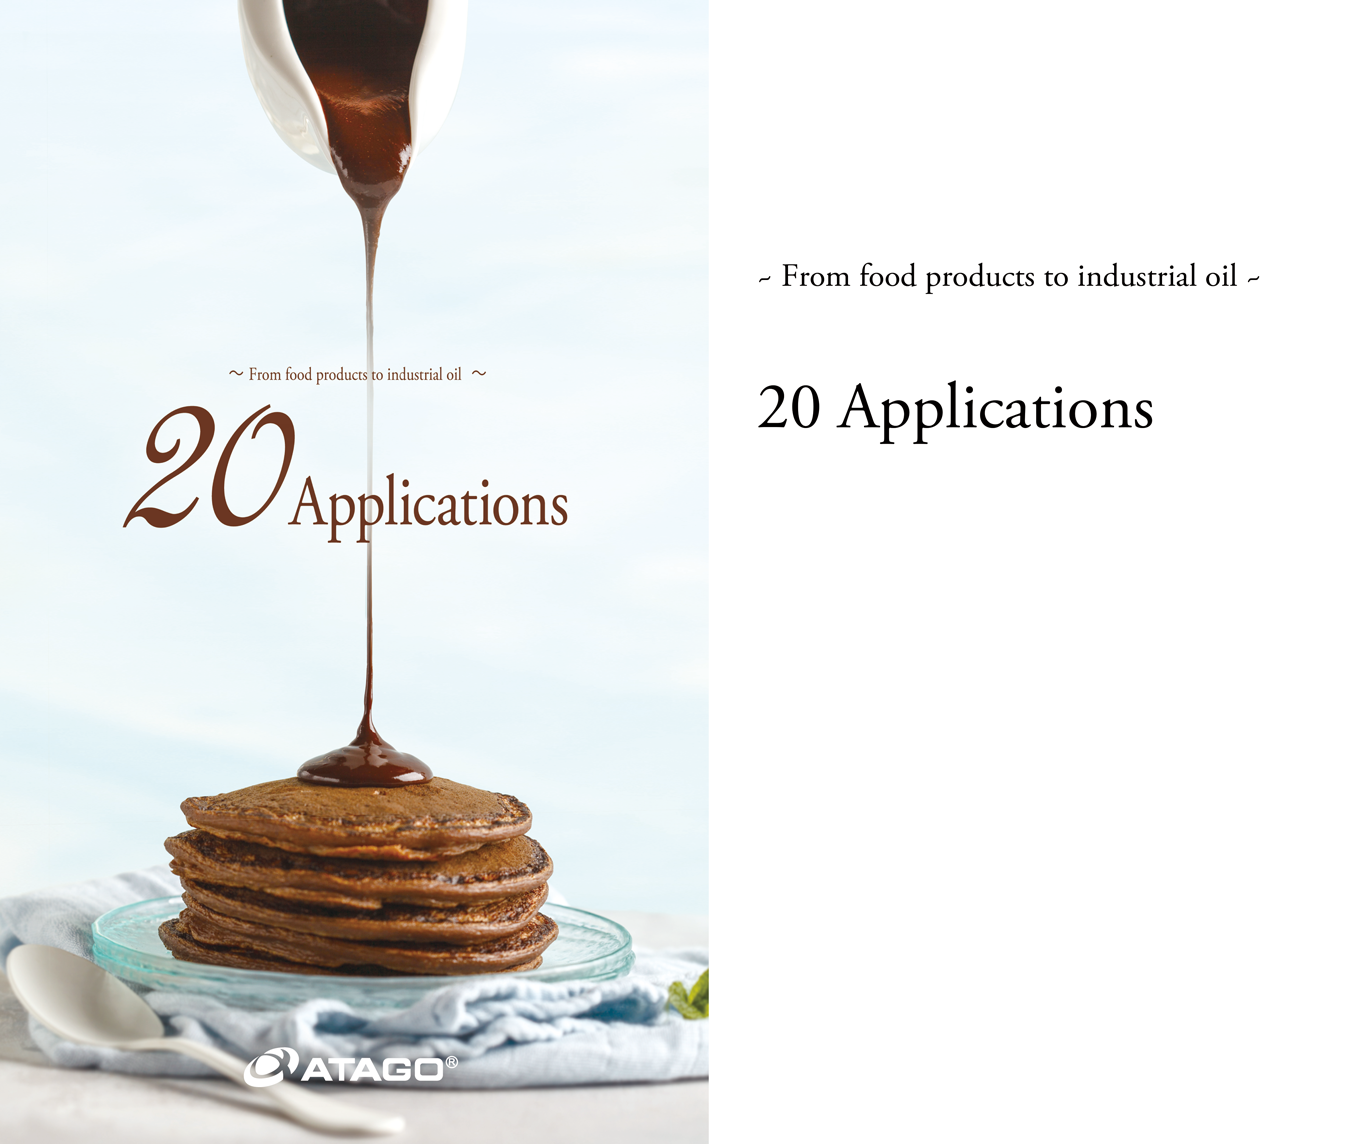 ～ From food products industrial il ～ 20 Applications